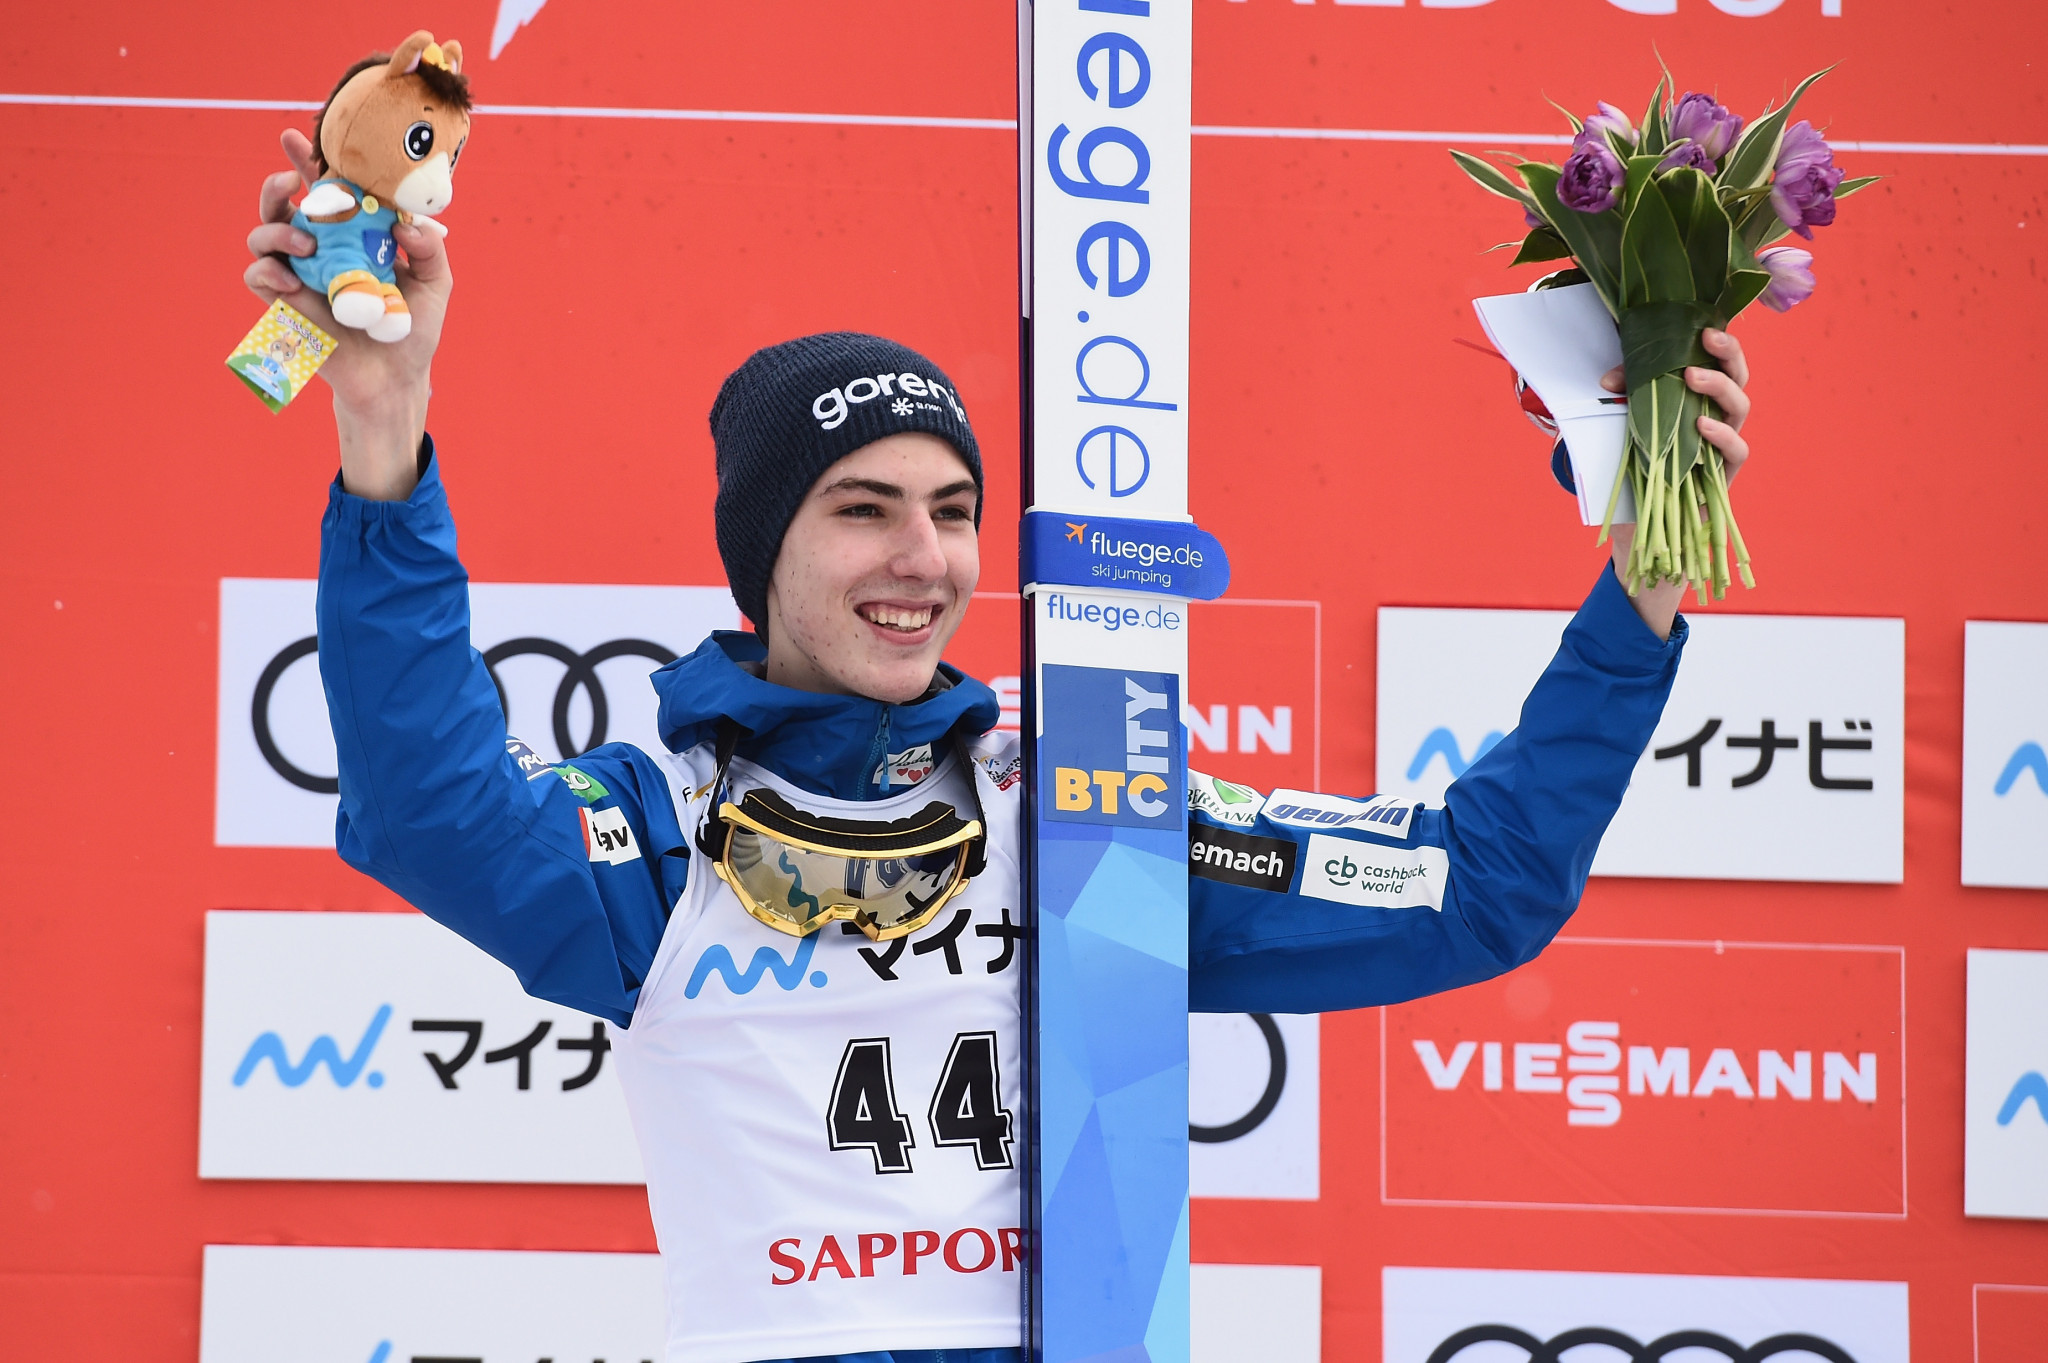 Timi Zajc finished well ahead of Ryoyu Kobayashi to win the FIS Ski Jumping World Cup in Oberstdorf today ©Getty Images